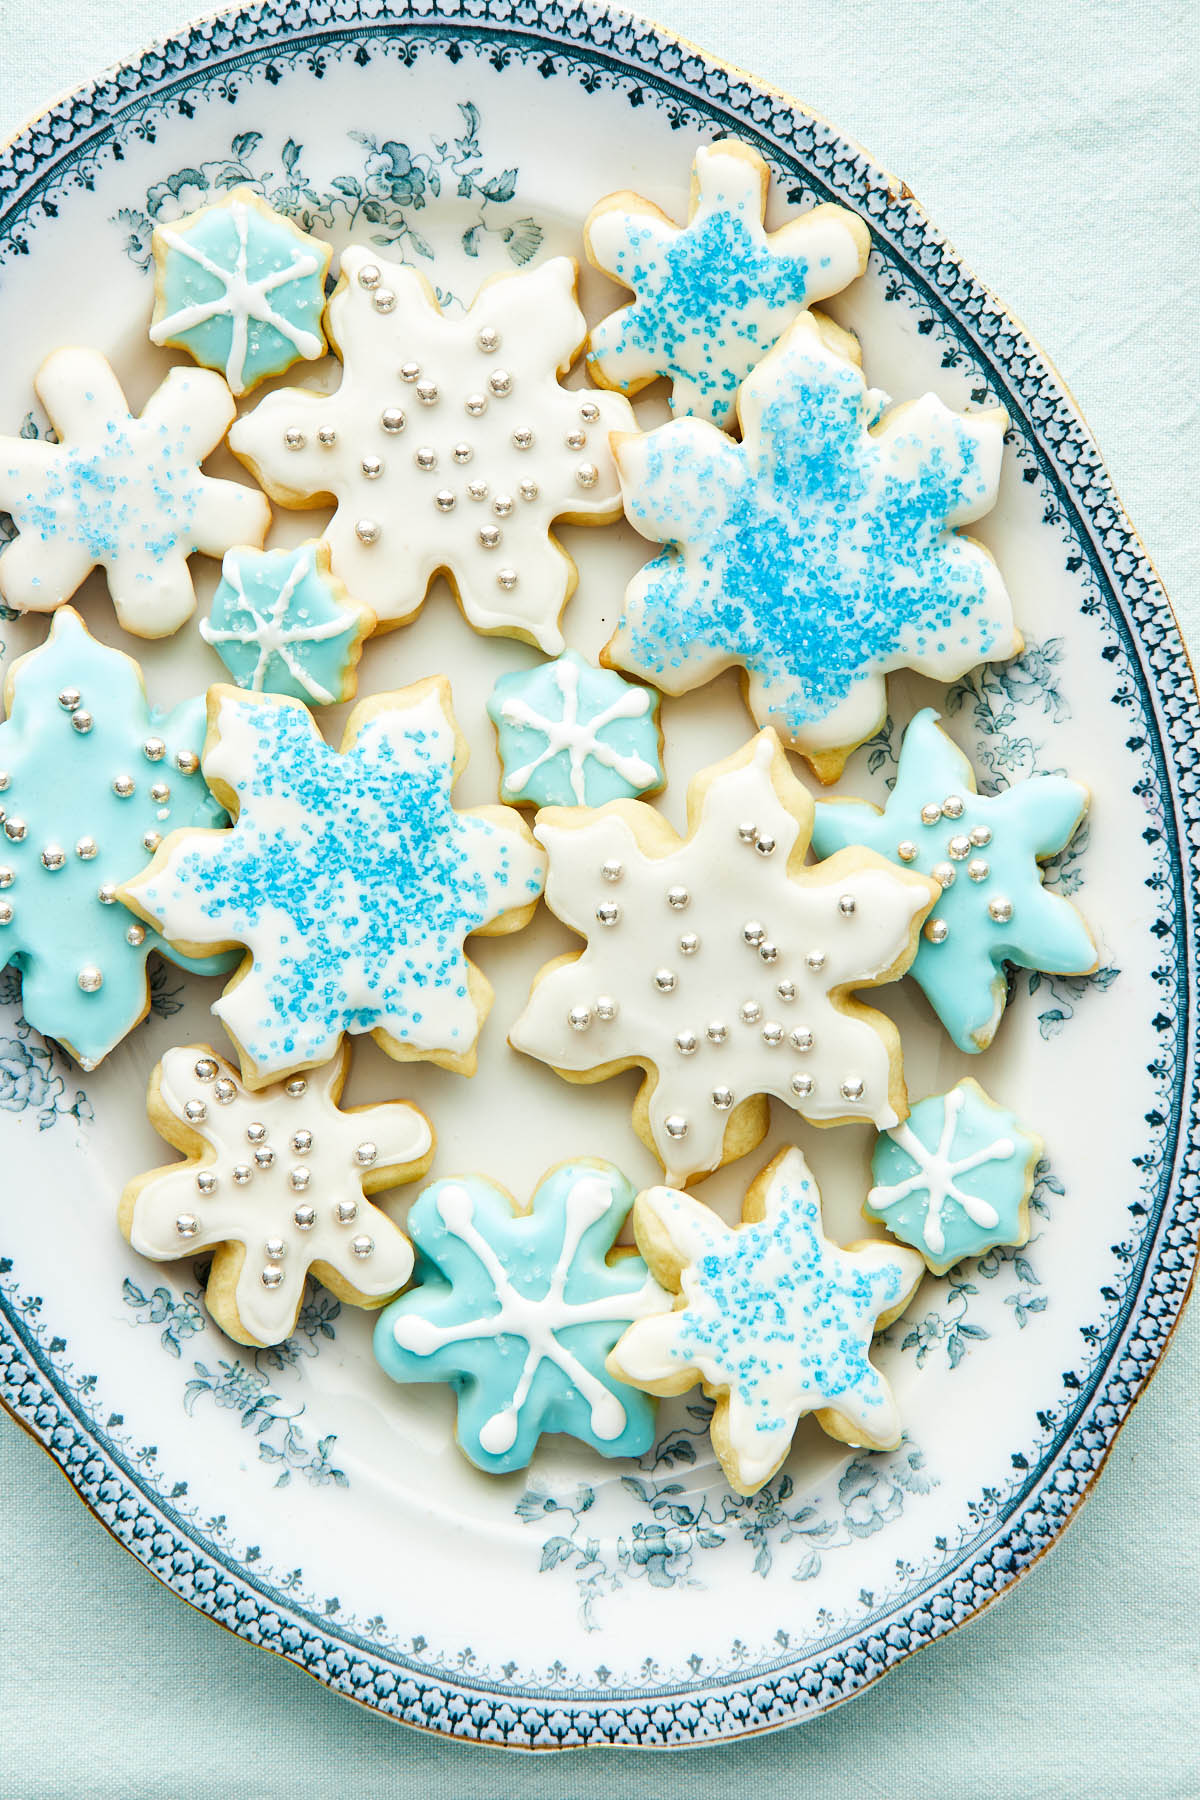 A large oval dish with blue trim topped with decorated snowflake sugar cookies.